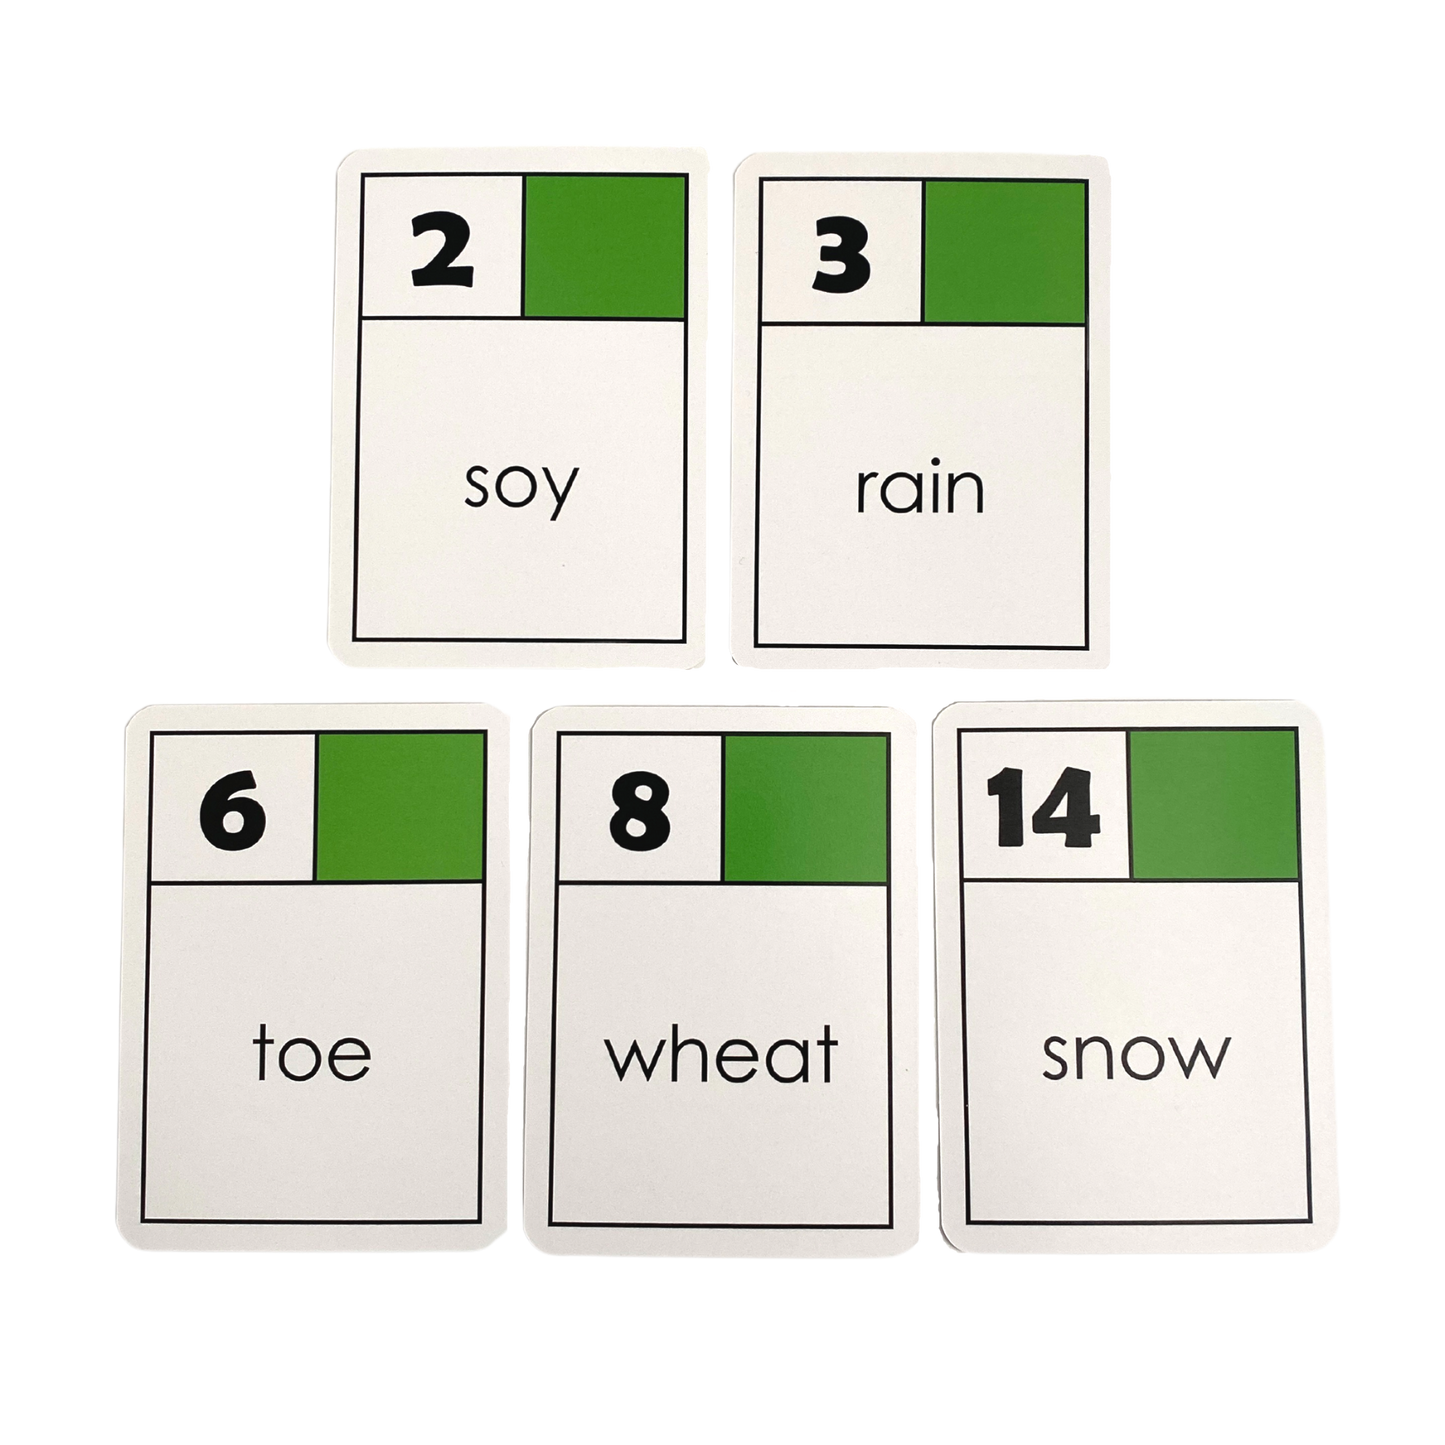 Use the Vowel Teams War game cards as a review drill in small group interventions or as a literacy center activity. This game helps students strengthen their reading skills, build their vocabulary, and improve their comprehension in a fun and interactive way. It is designed to reinforce key concepts in a way that is engaging and memorable.